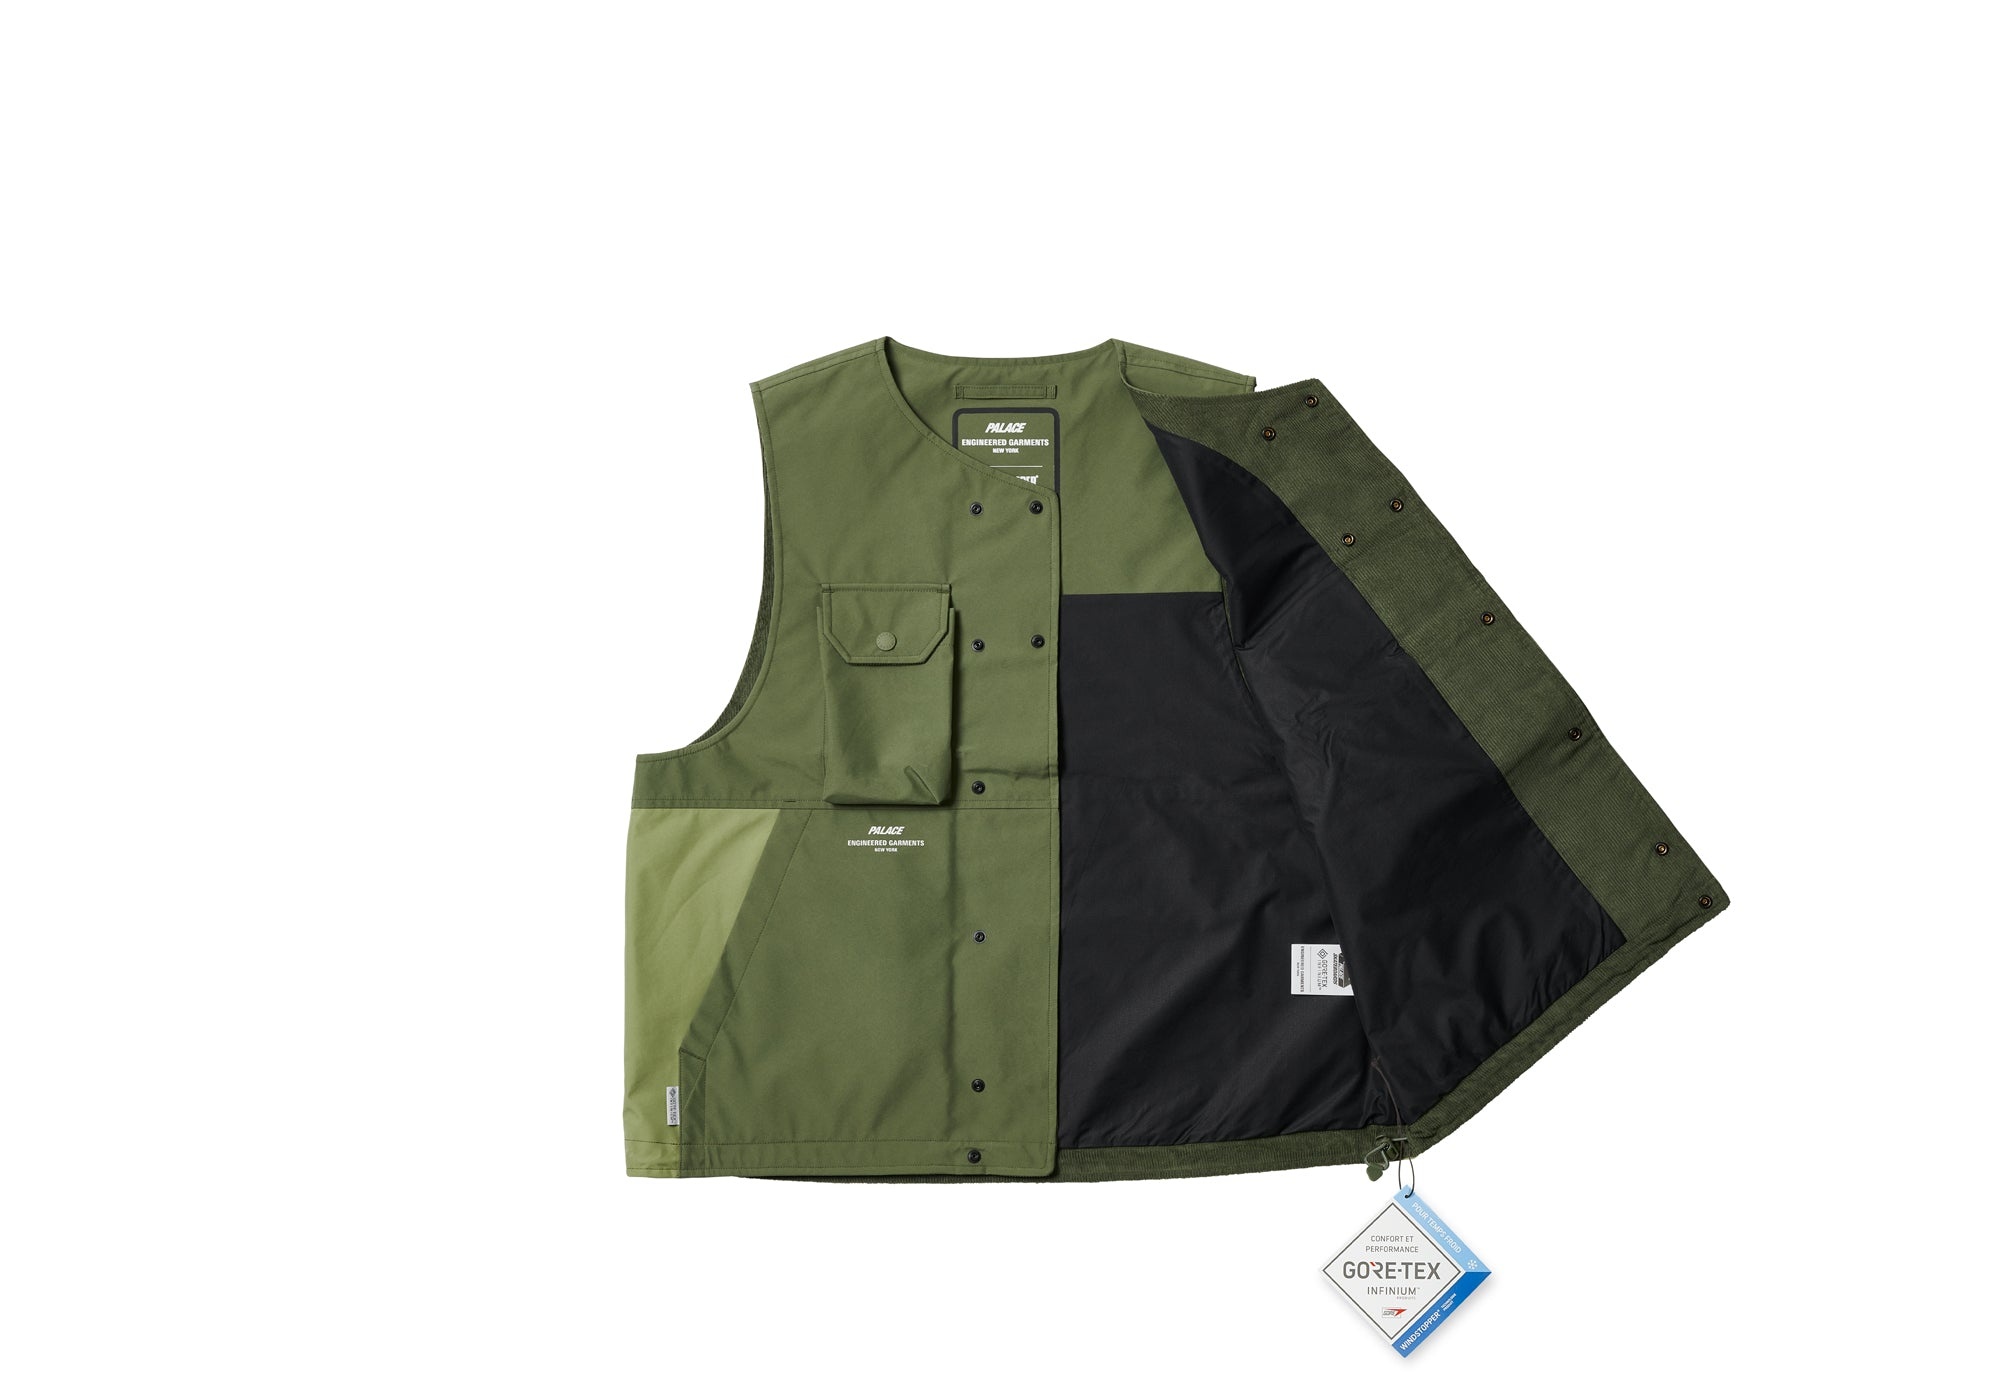 PALACE ENGINEERED GARMENTS GORE-TEX INFINIUM COVER VEST OLIVE - 2